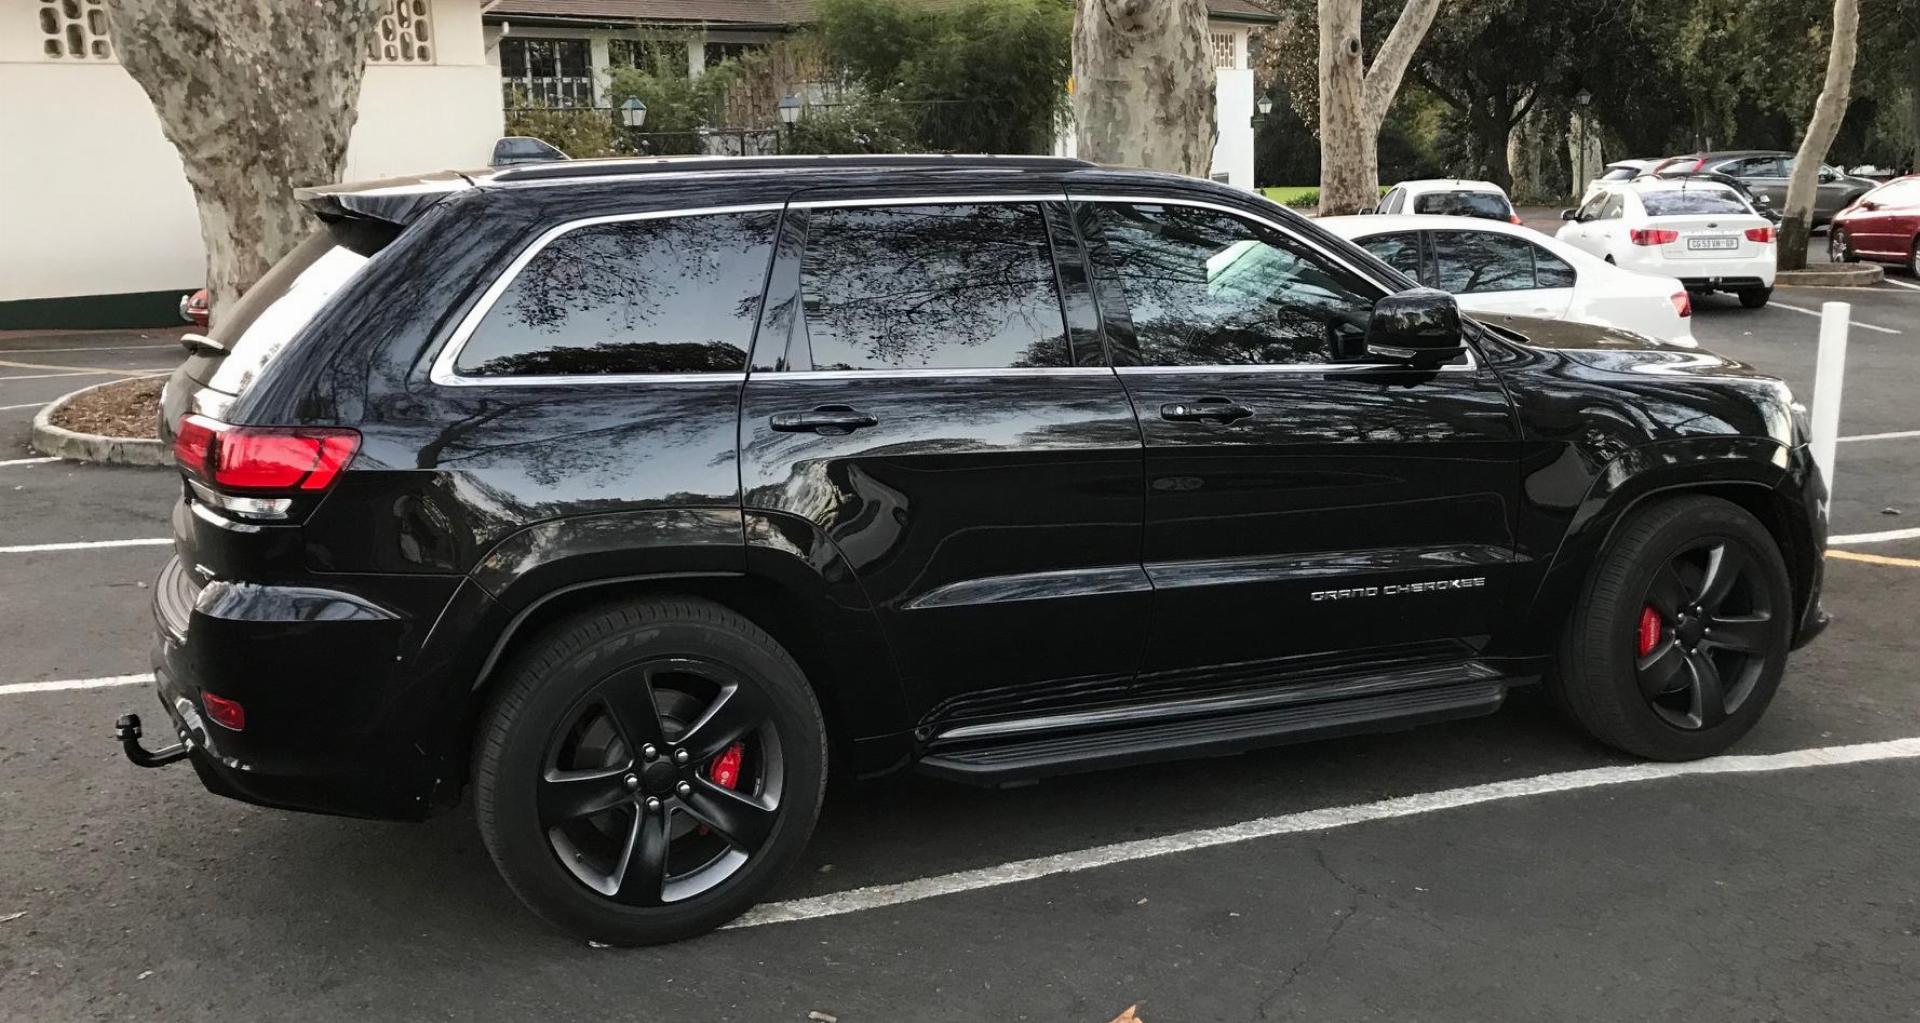 Used Jeep Grand Cherokee 6.4 SRT8 2016 on auction PV1028145